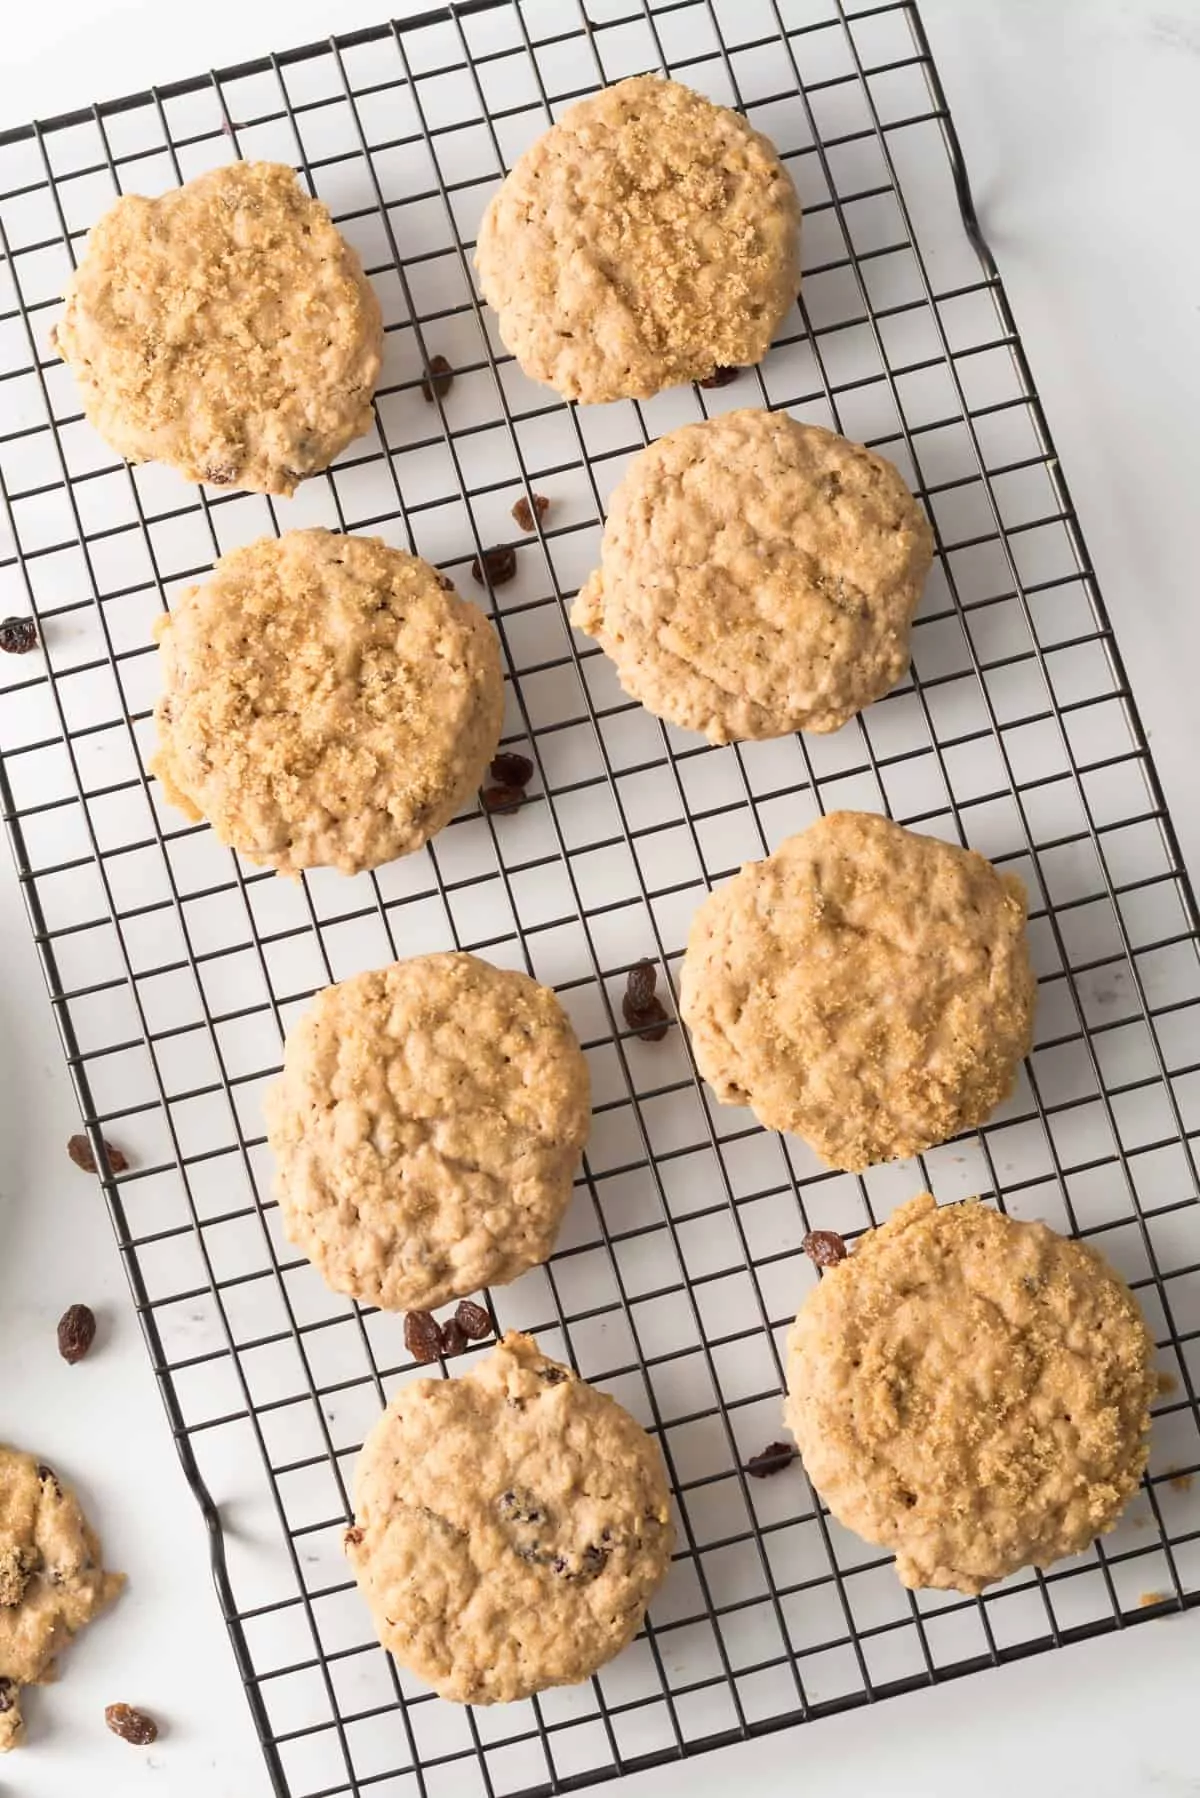 Simple Oatmeal cookie recipes made for diabetics with brown sugar substitute and raisons 